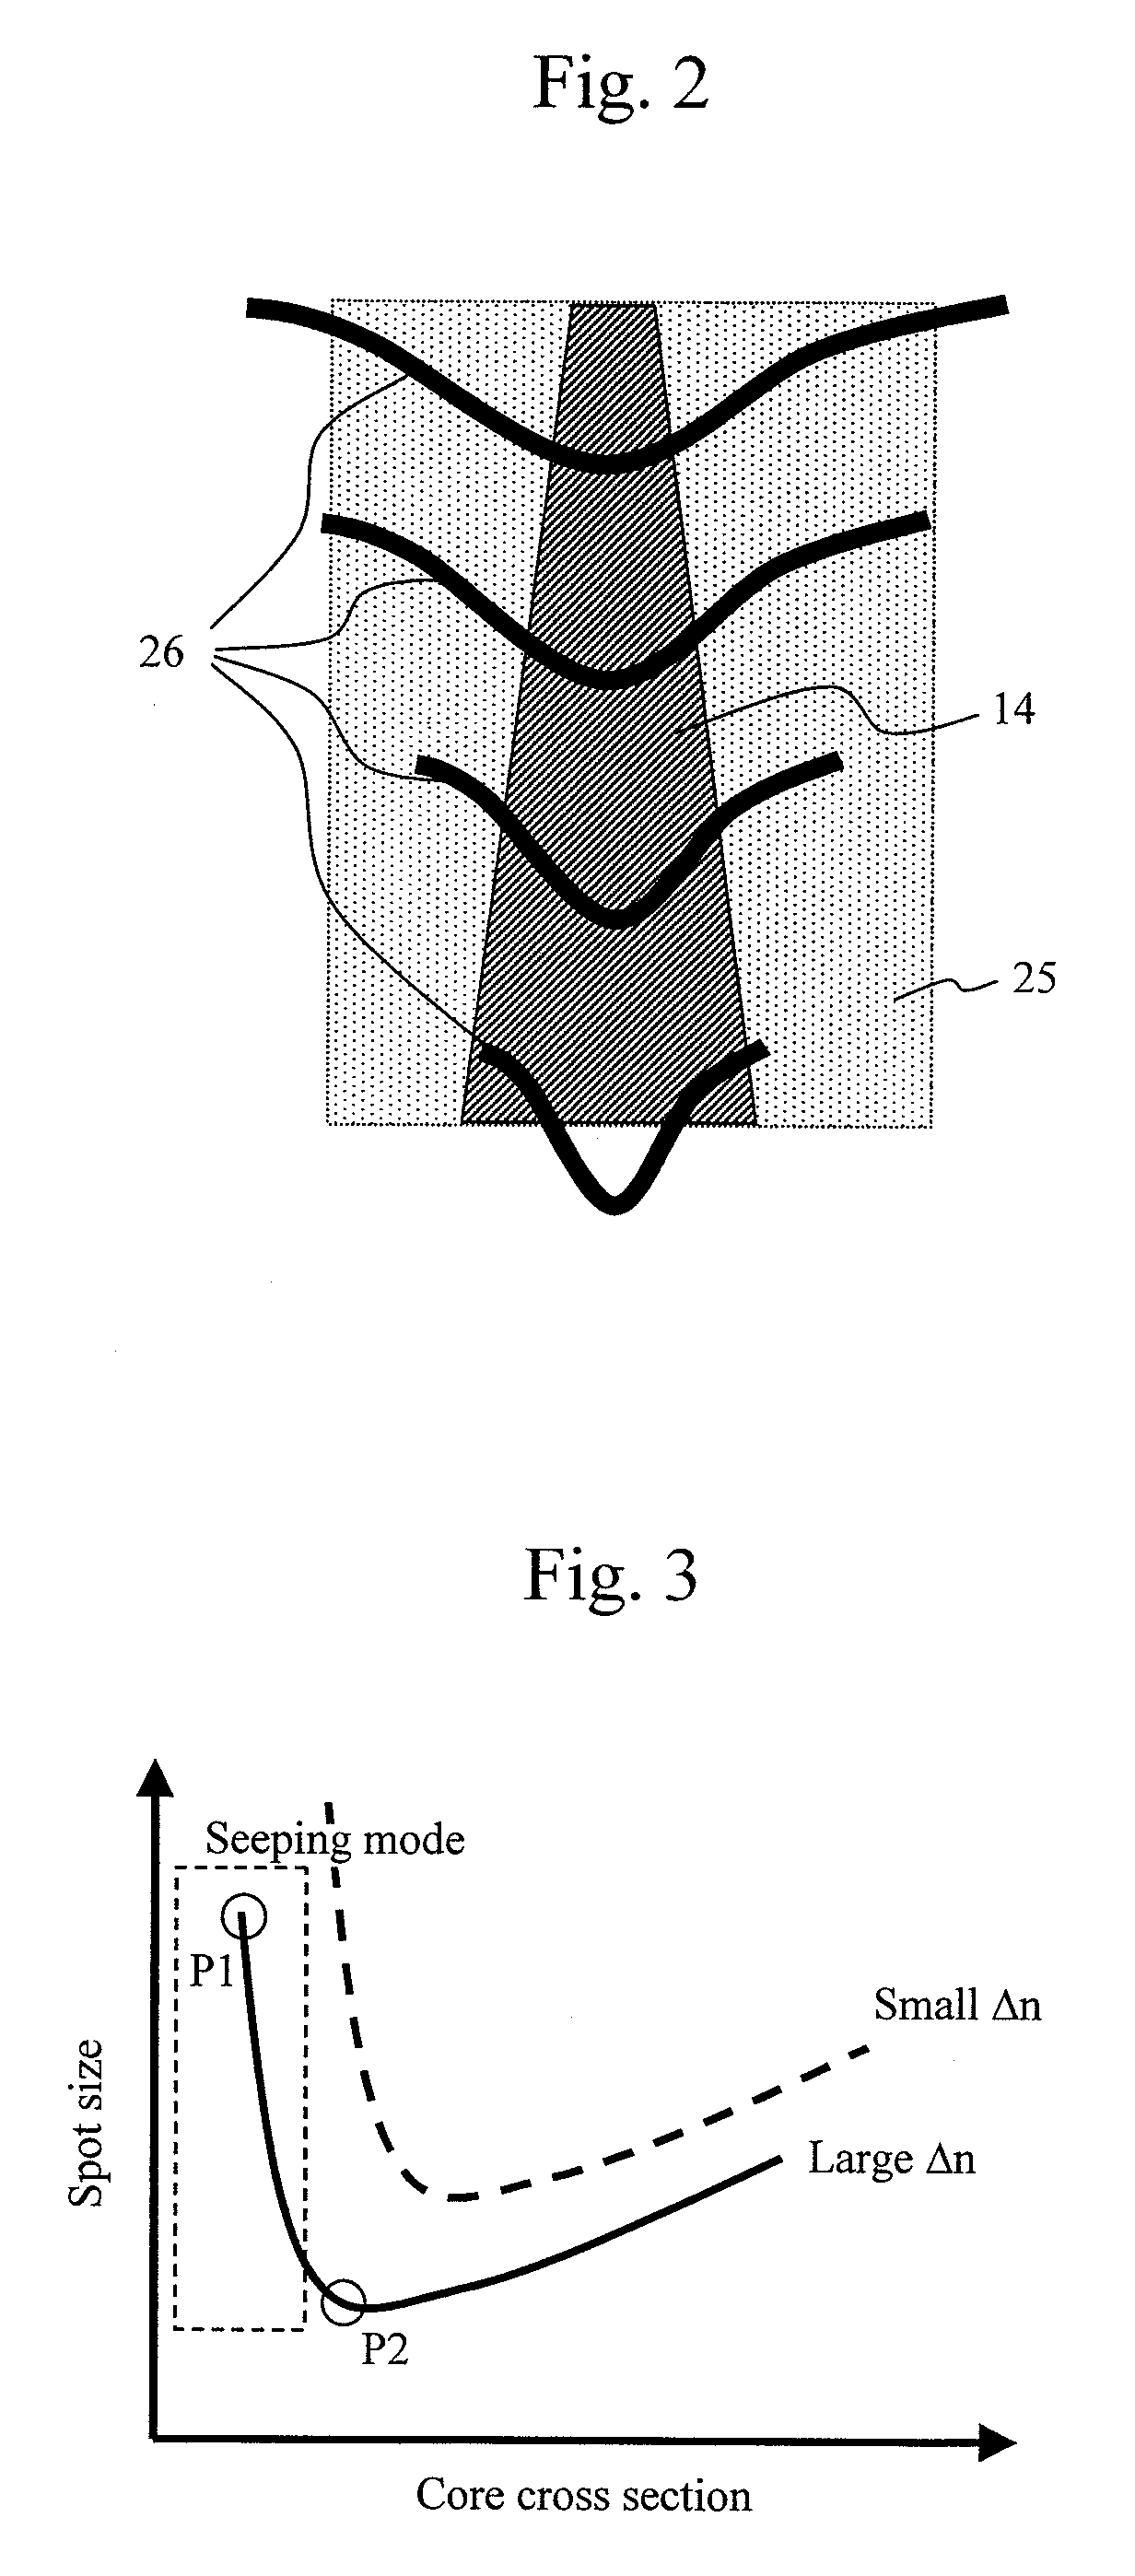 Magnetic recording system used thermal-assisted-magnetic- recording head